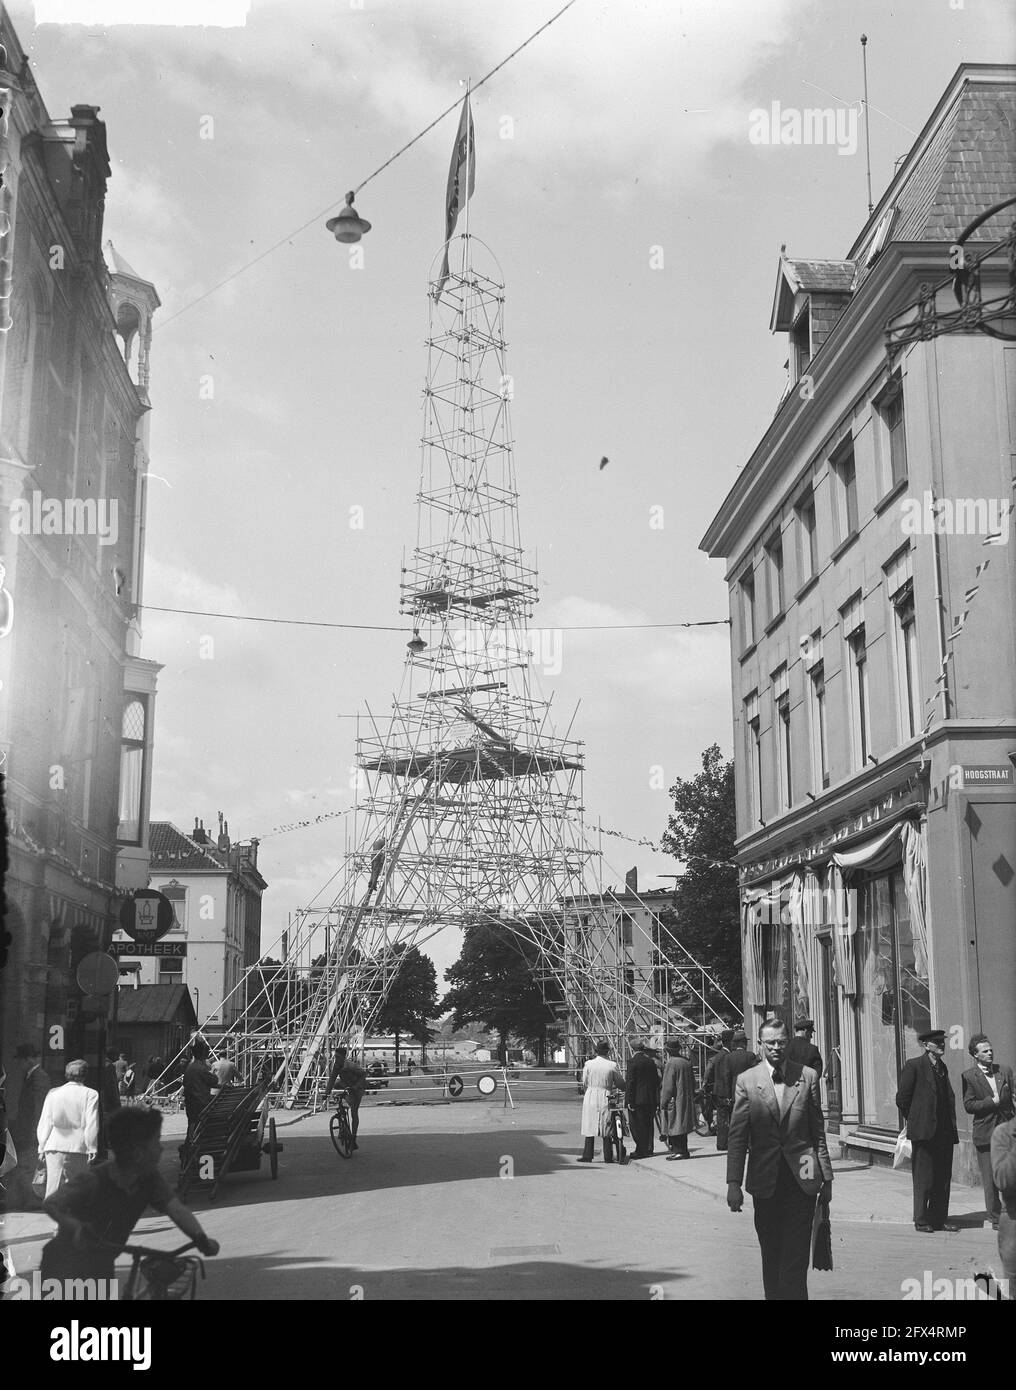 Event Paris in Arnhem, replica of the Eiffel Tower, May 31, 1950, events, The Netherlands, 20th century press agency photo, news to remember, documentary, historic photography 1945-1990, visual stories, human history of the Twentieth Century, capturing moments in time Stock Photo